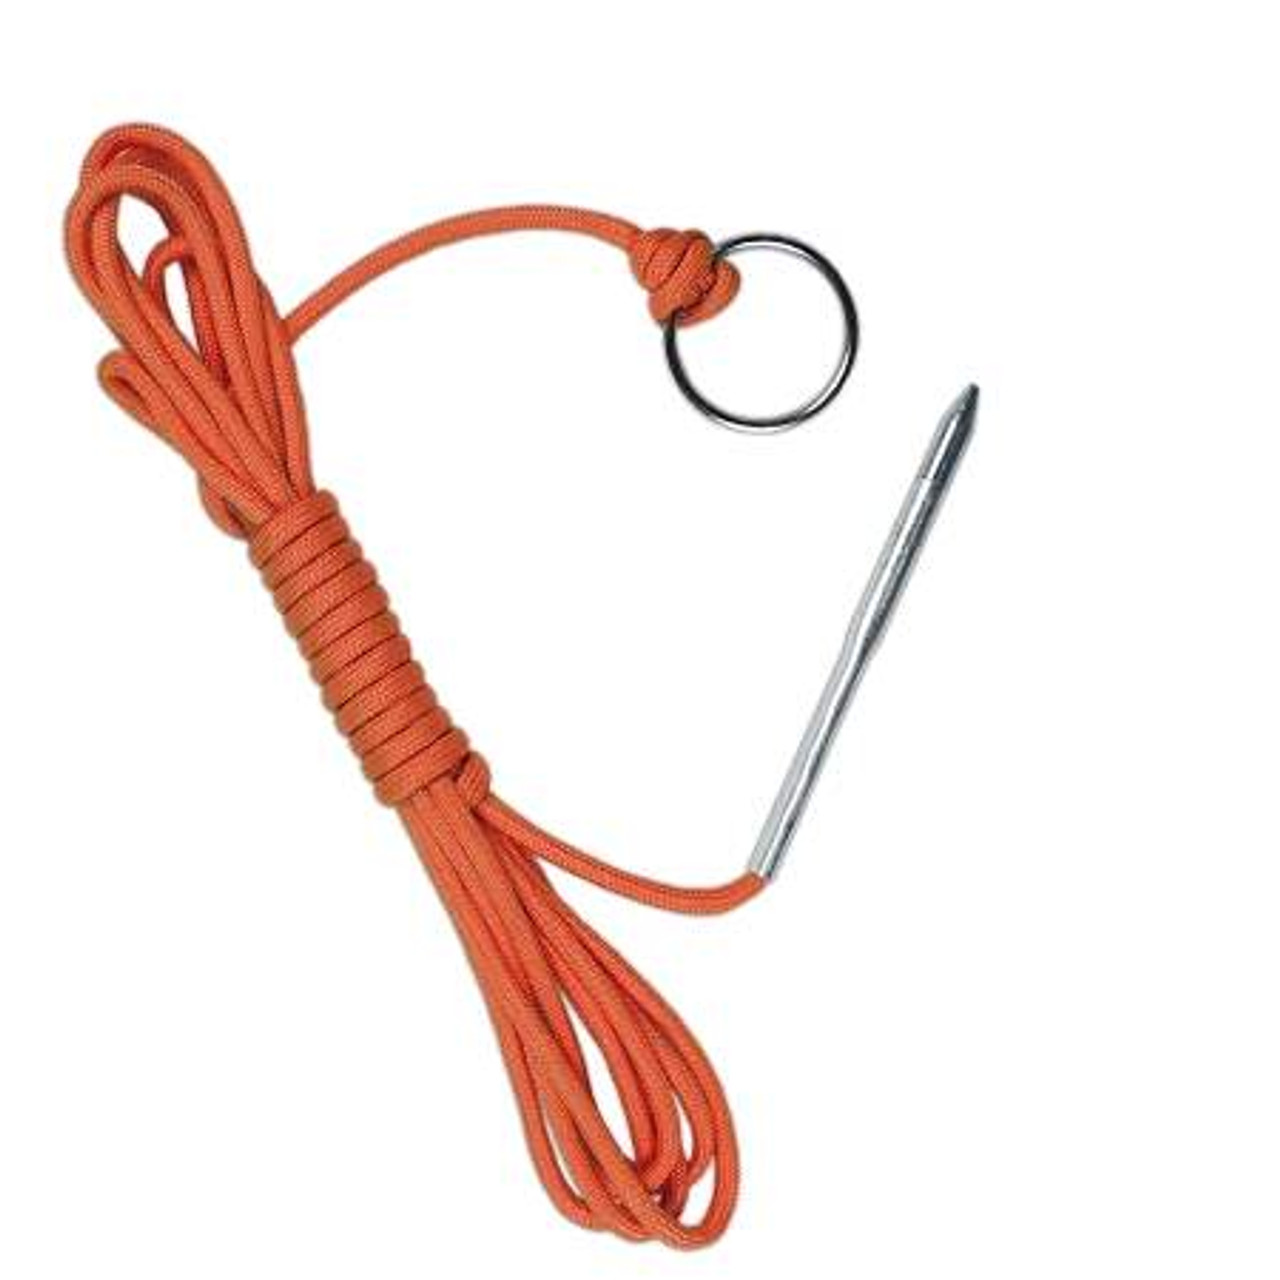 10' Paracord Fishing Stringer - Catch